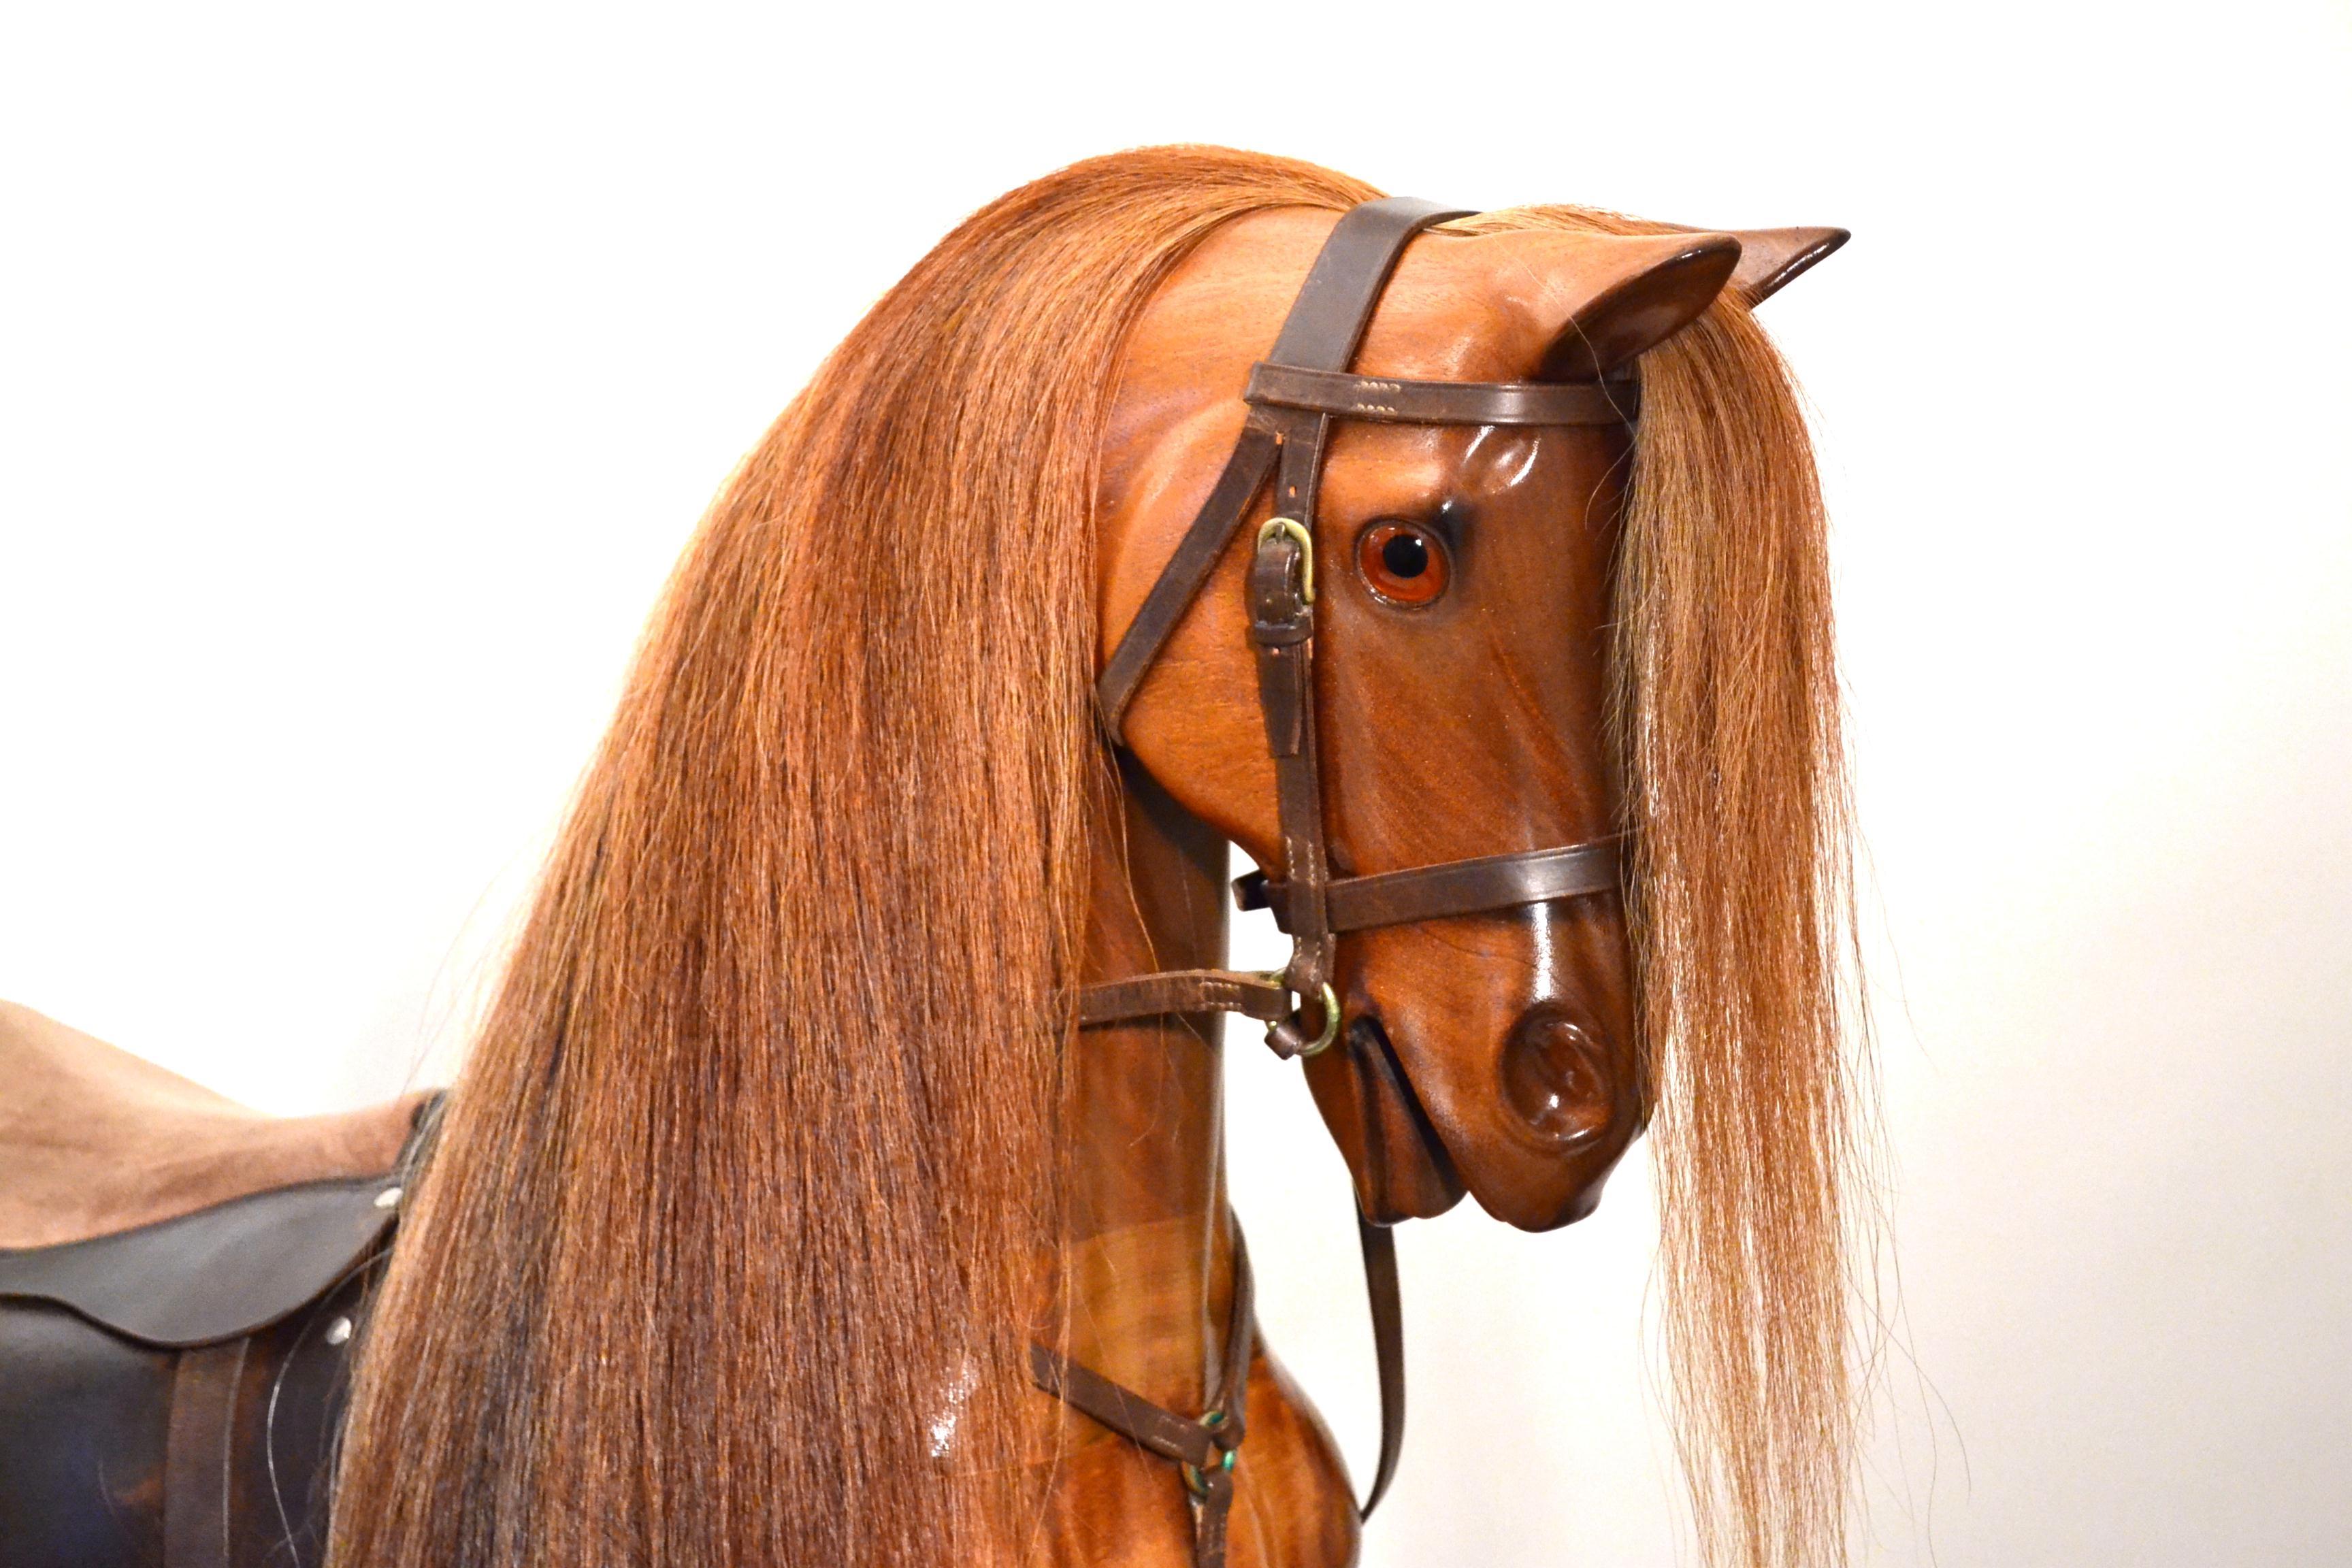 Handcrafted wooden rocking horse by Geoff Martin

A fine handcrafted chestnut rocking horse by Geoff Martin of Horsecraft. With arched neck and pricked ears glass eyes and real horse hair mane and tail. Hand stitched leather bridle and martingale